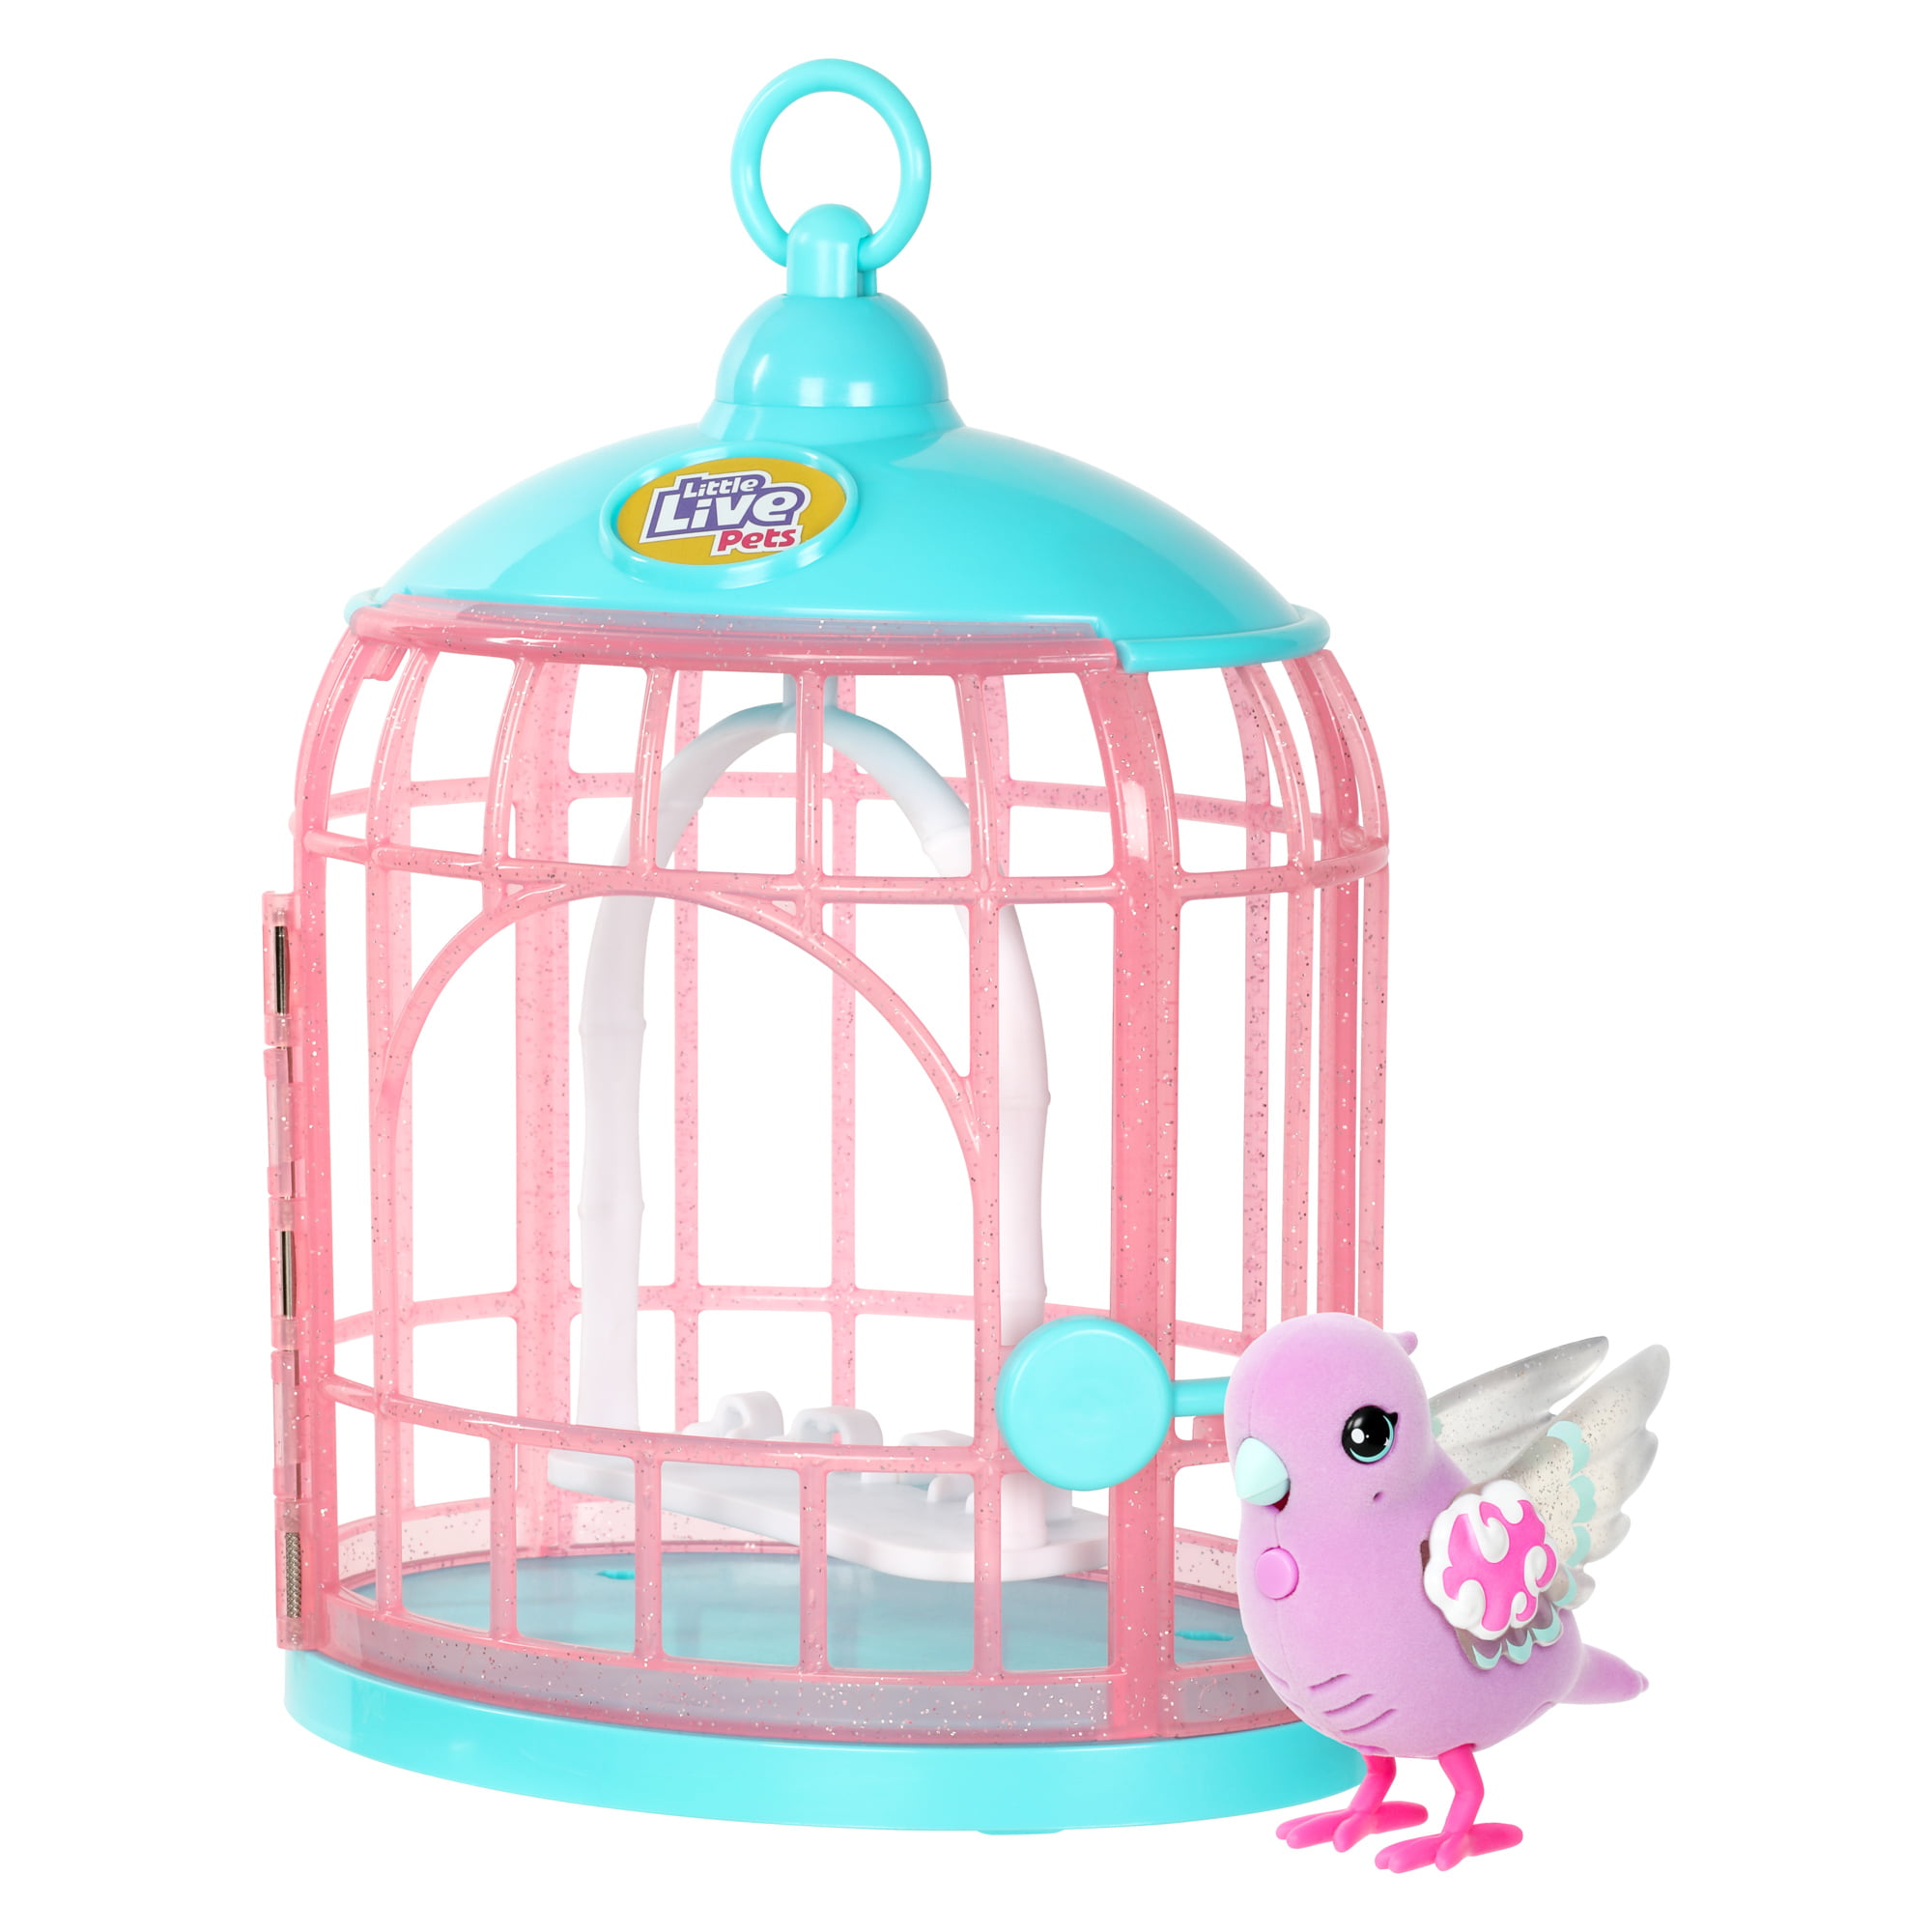 Buy Little Live Pets, Lil' Bird & Bird Cage: Polly Pearl, Pet, Playset ...